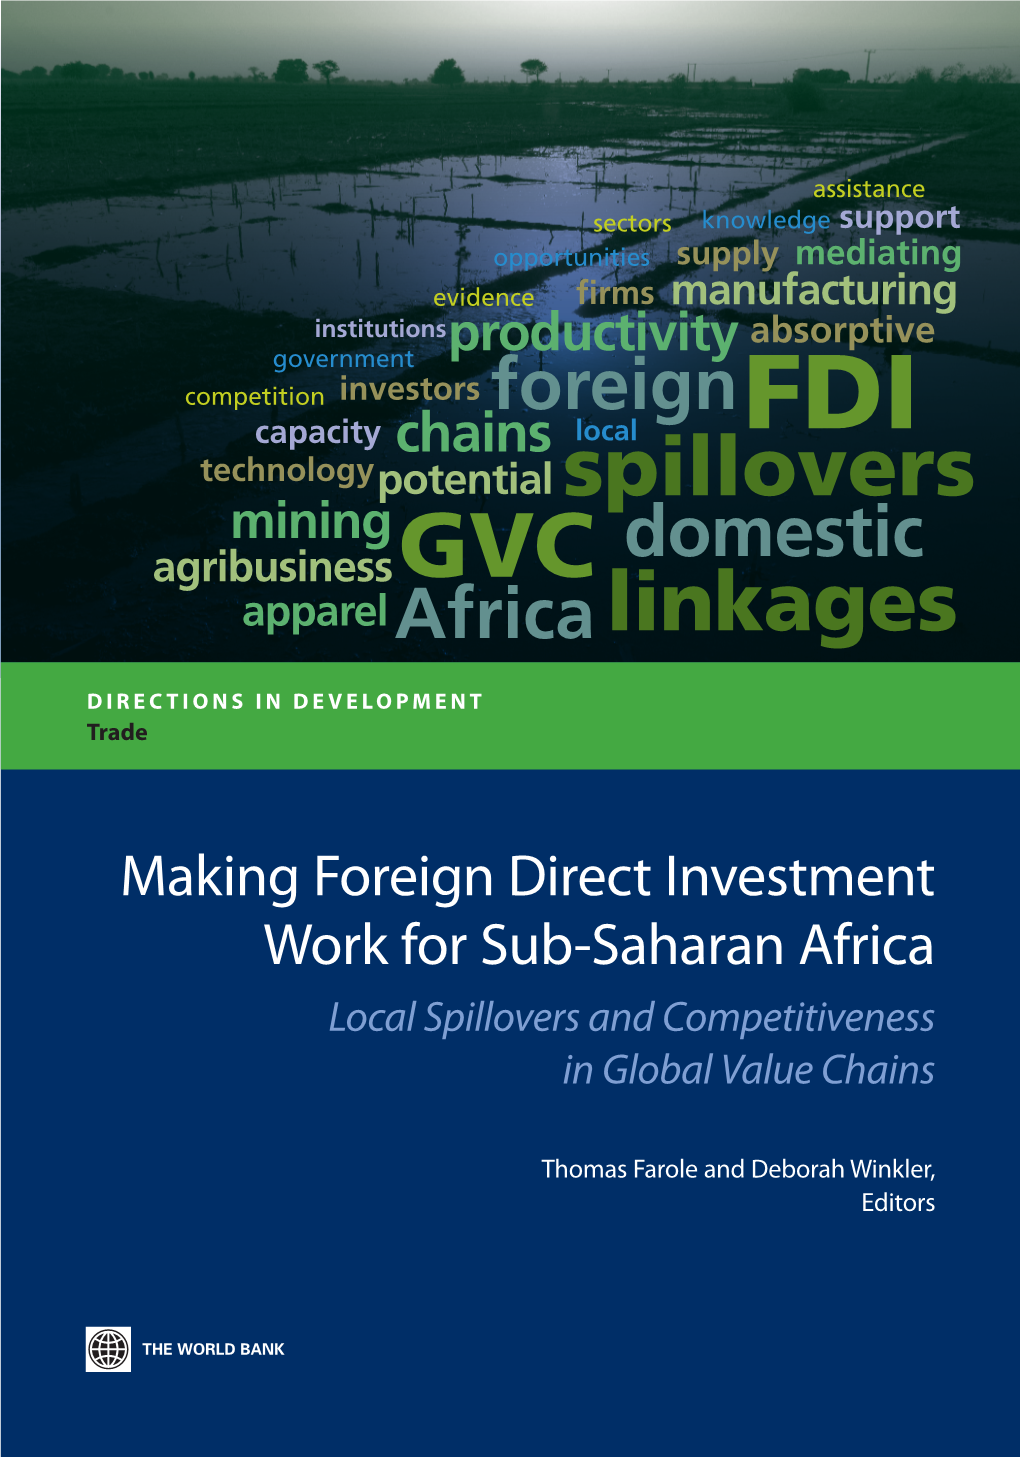 Making Foreign Direct Investment Work for Sub-Saharan Africa Local Spillovers and Competitiveness in Global Value Chains